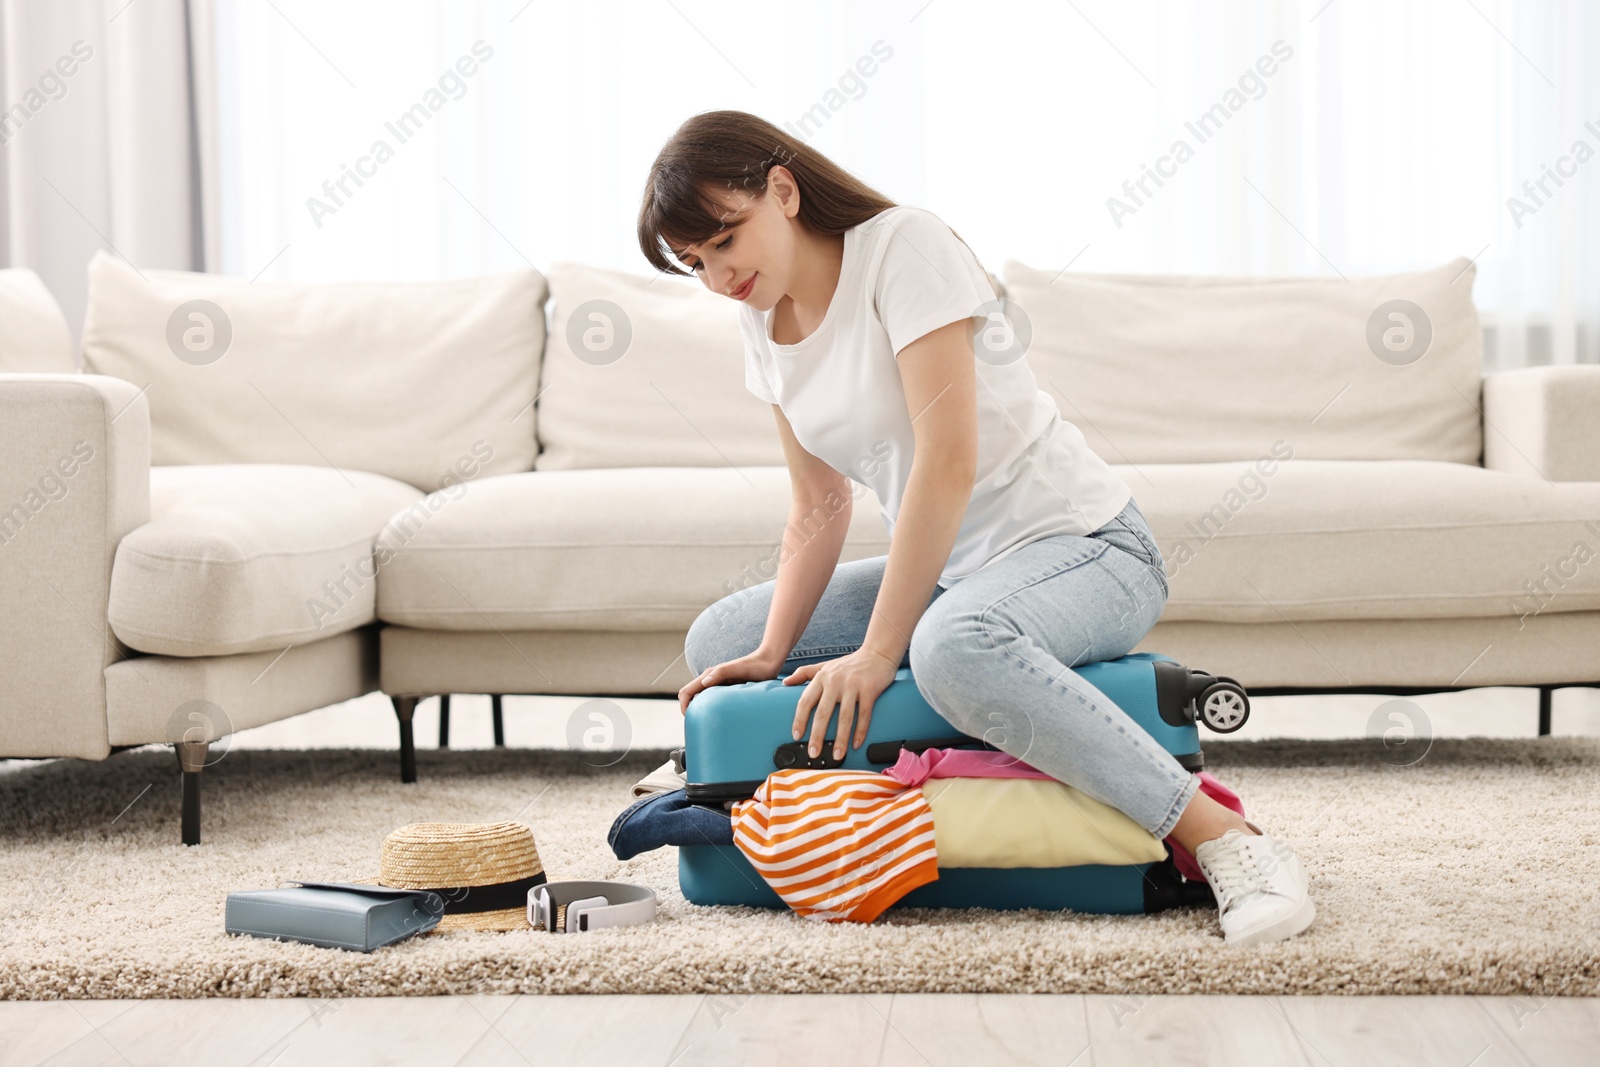 Photo of Woman packing suitcase for trip on floor indoors